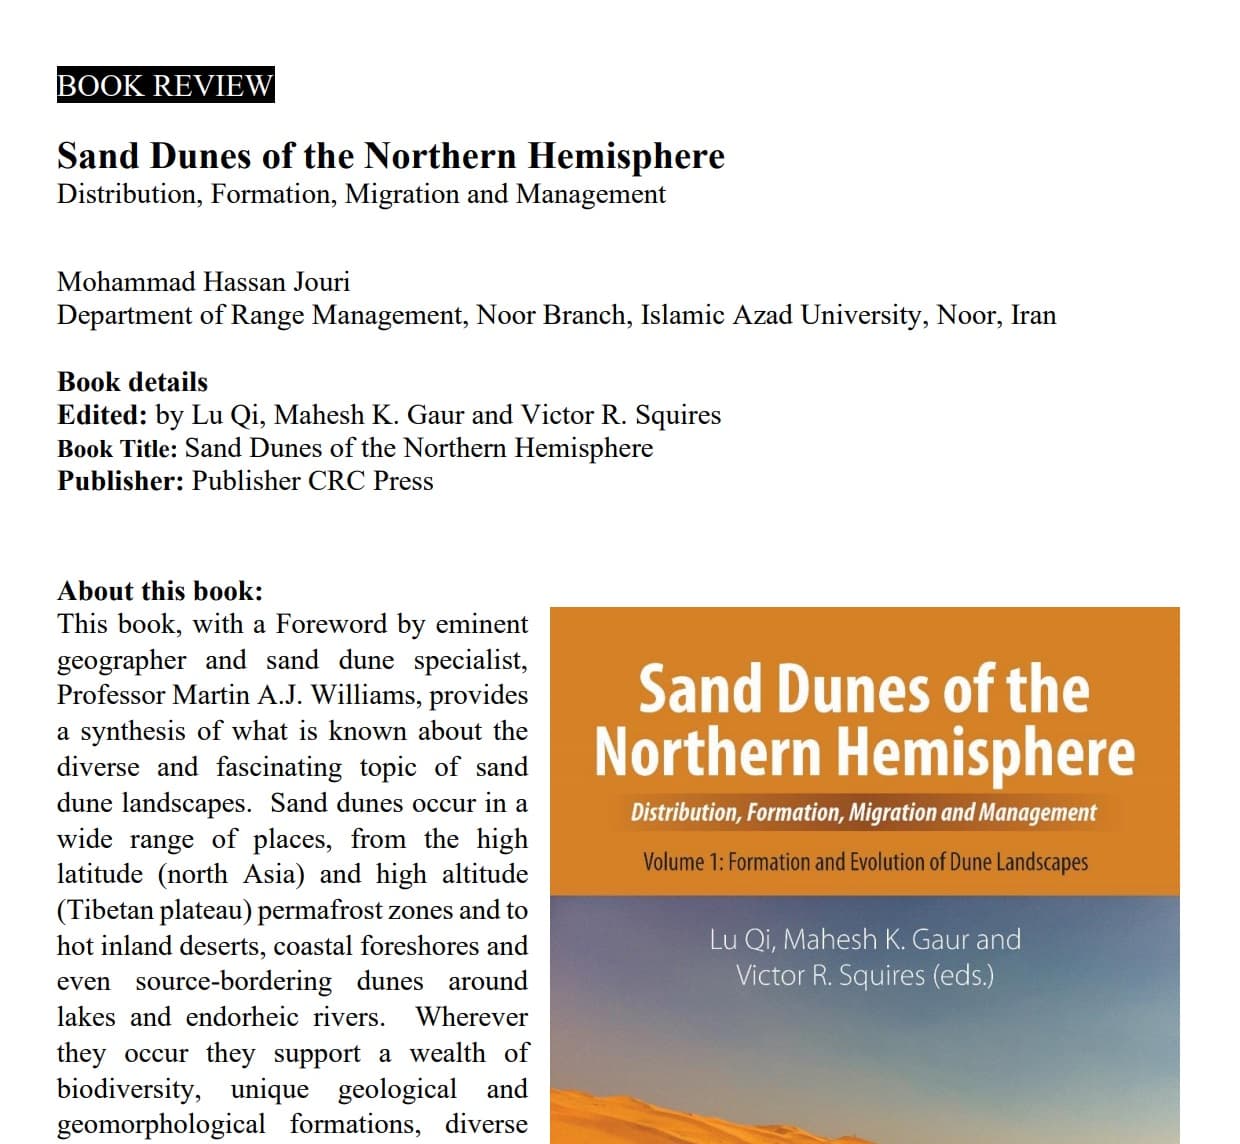 Sand Dunes of the Northern Hemisphere Distribution, Formation, Migration and Management